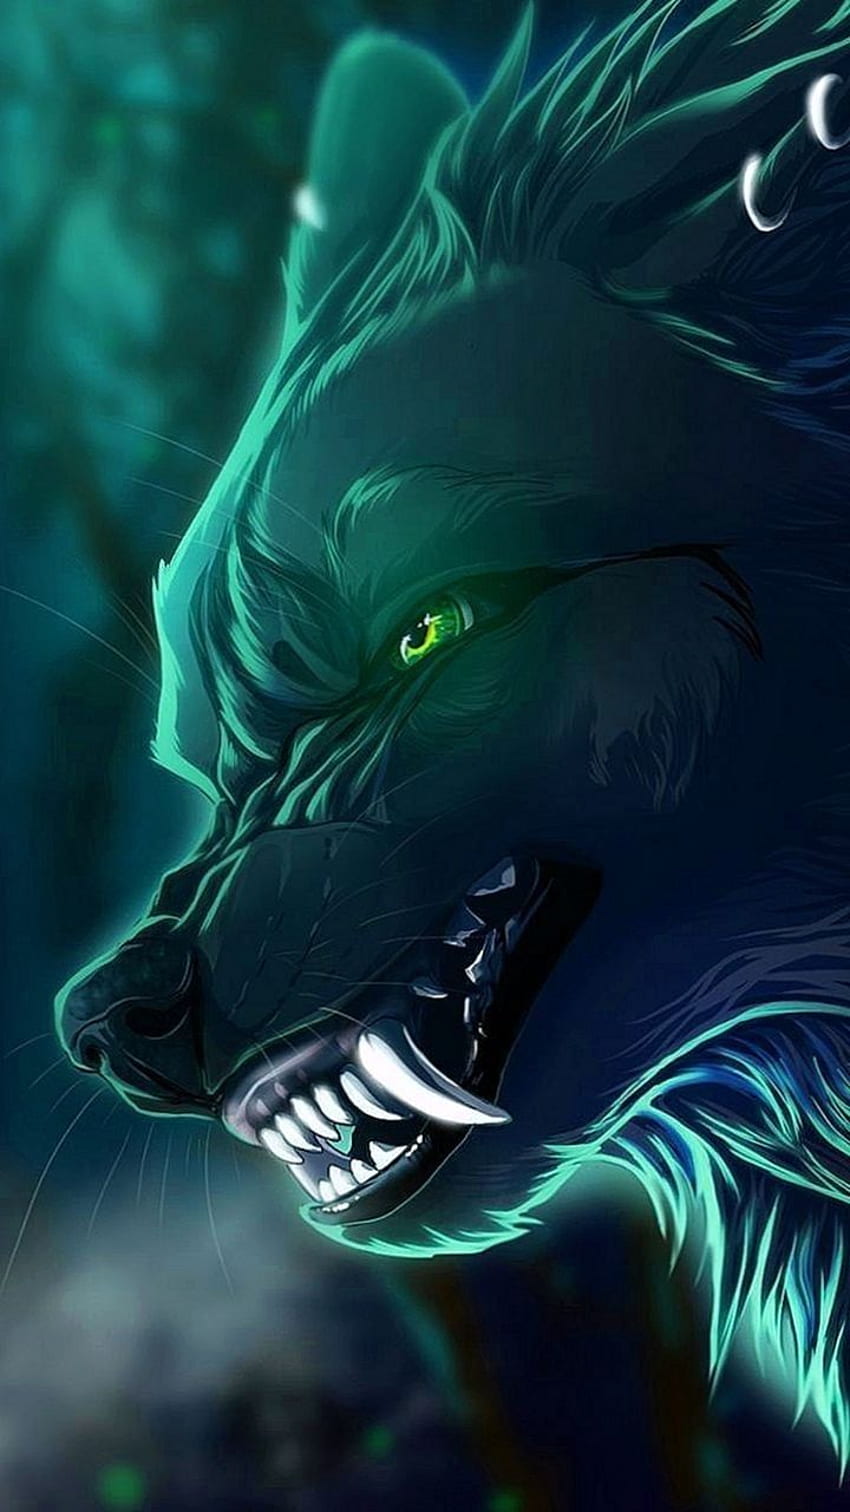 Anime Wolf For Phone. Anime wolf, Fantasy wolf, Anime wolf drawing, Dragon and Wolf HD phone wallpaper